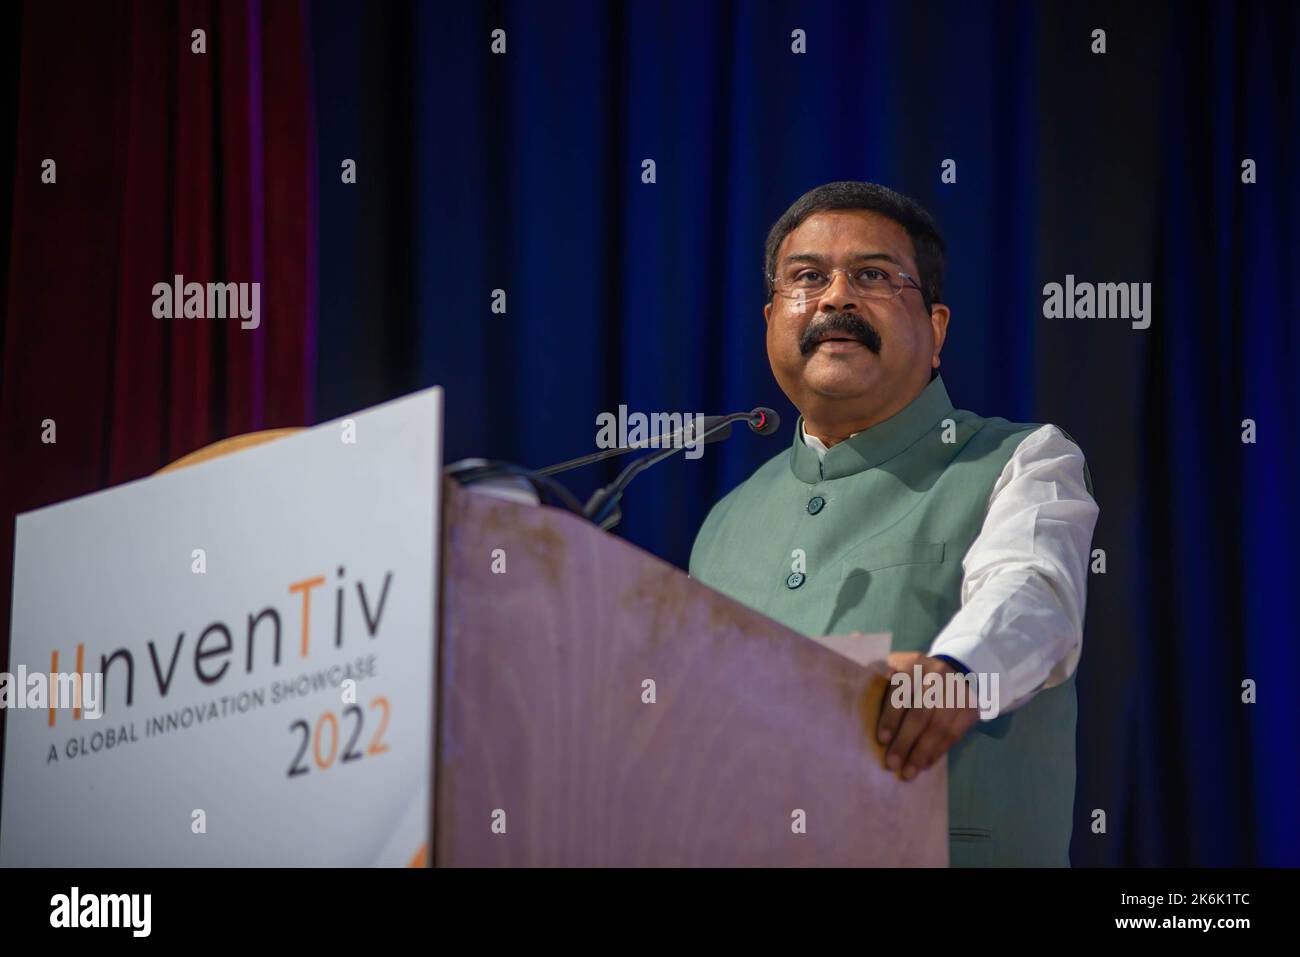 Delhi, India. 14th Oct, 2022. Dharmendra Pradhan Union Minister for Education and Skill Development and Entrepreneurship during inaugural day of IInvenTiv 2022, the first ever all IITs (indian institute of technology) research and development Showcase at the Indian Institute of Technology. IInvenTiv 2022 is an R&D (research and development) Fair organised under the supervision of a Steering Committee headed by Dr. Pawan Goenka, Chairman, BoG (Board of Governors) IIT and the event marks the coming together of all the 23 IITs under one umbrella to showcase their respective research and innovatio Stock Photo